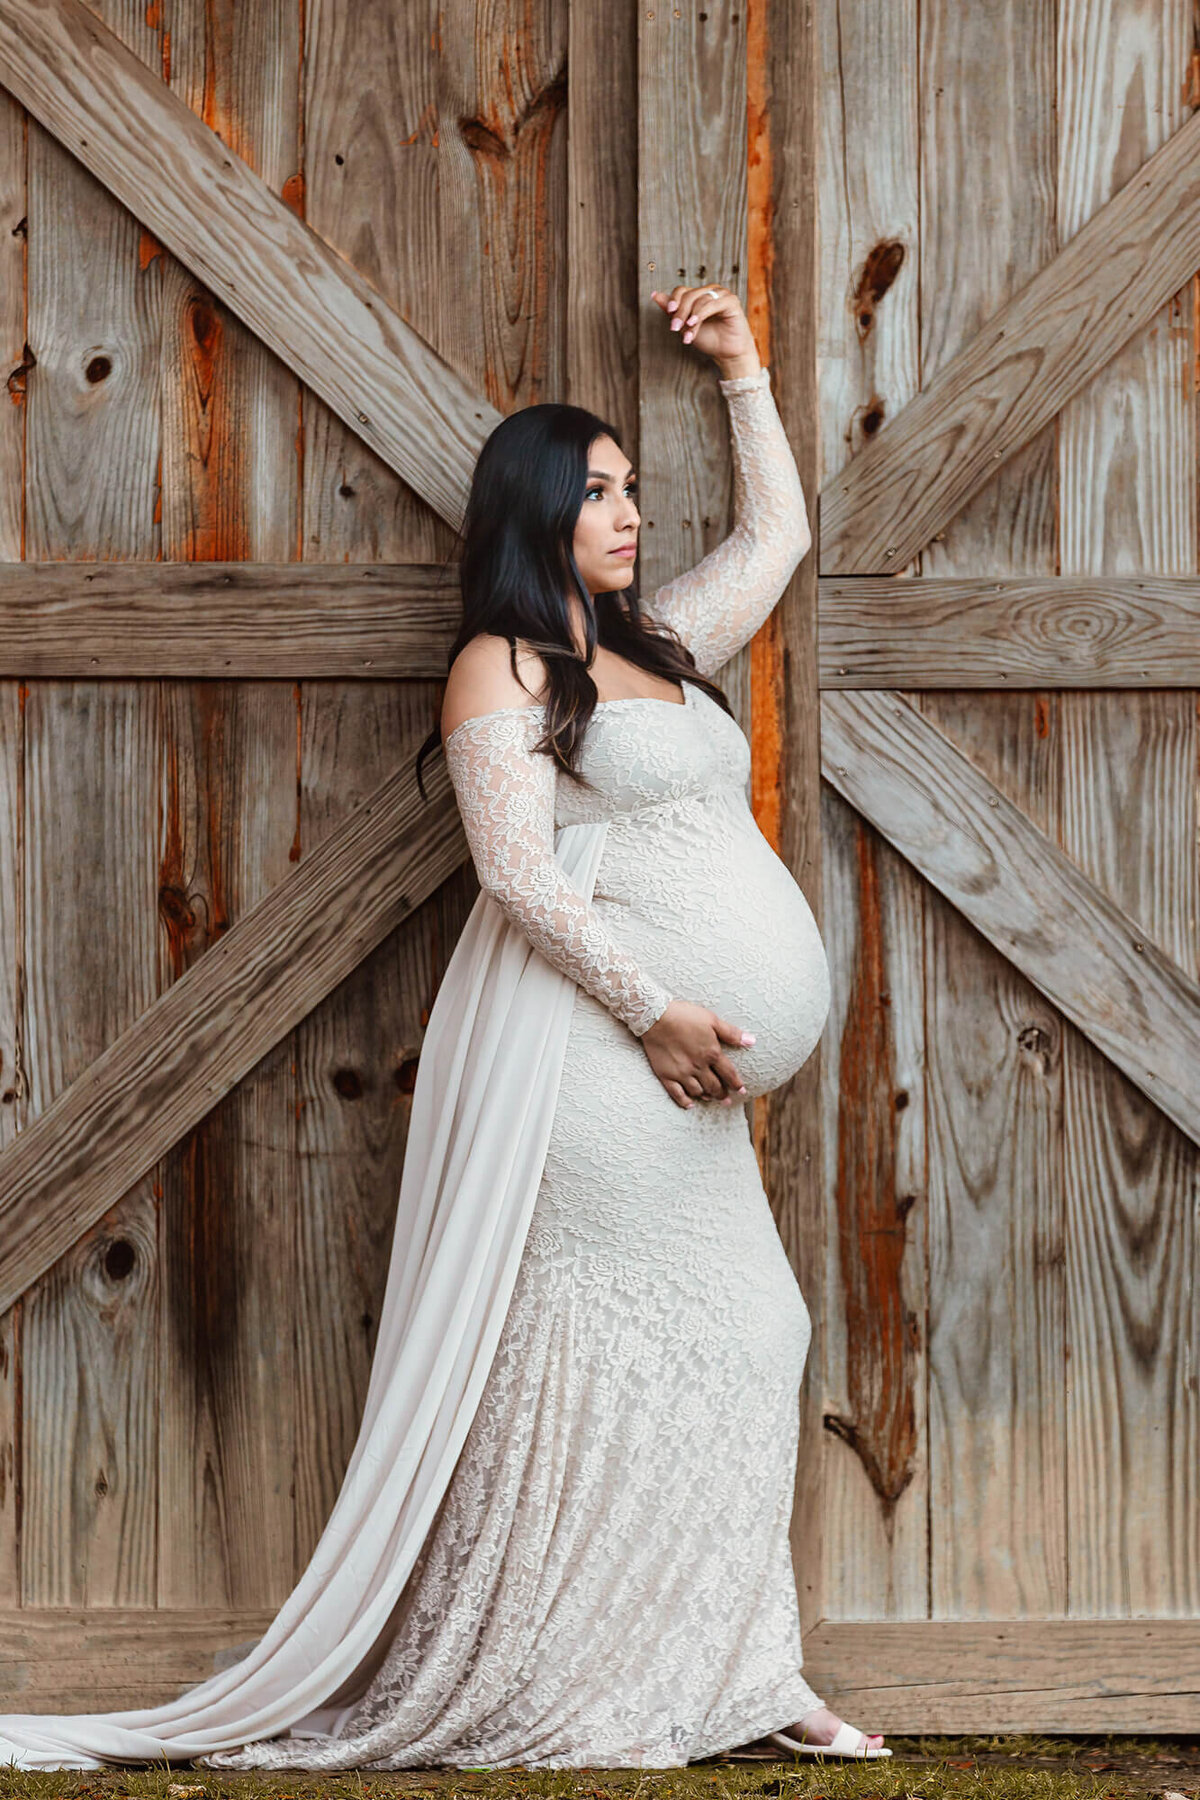 Maternity portrait in front of a barn captured by Danielle Dott Photography.